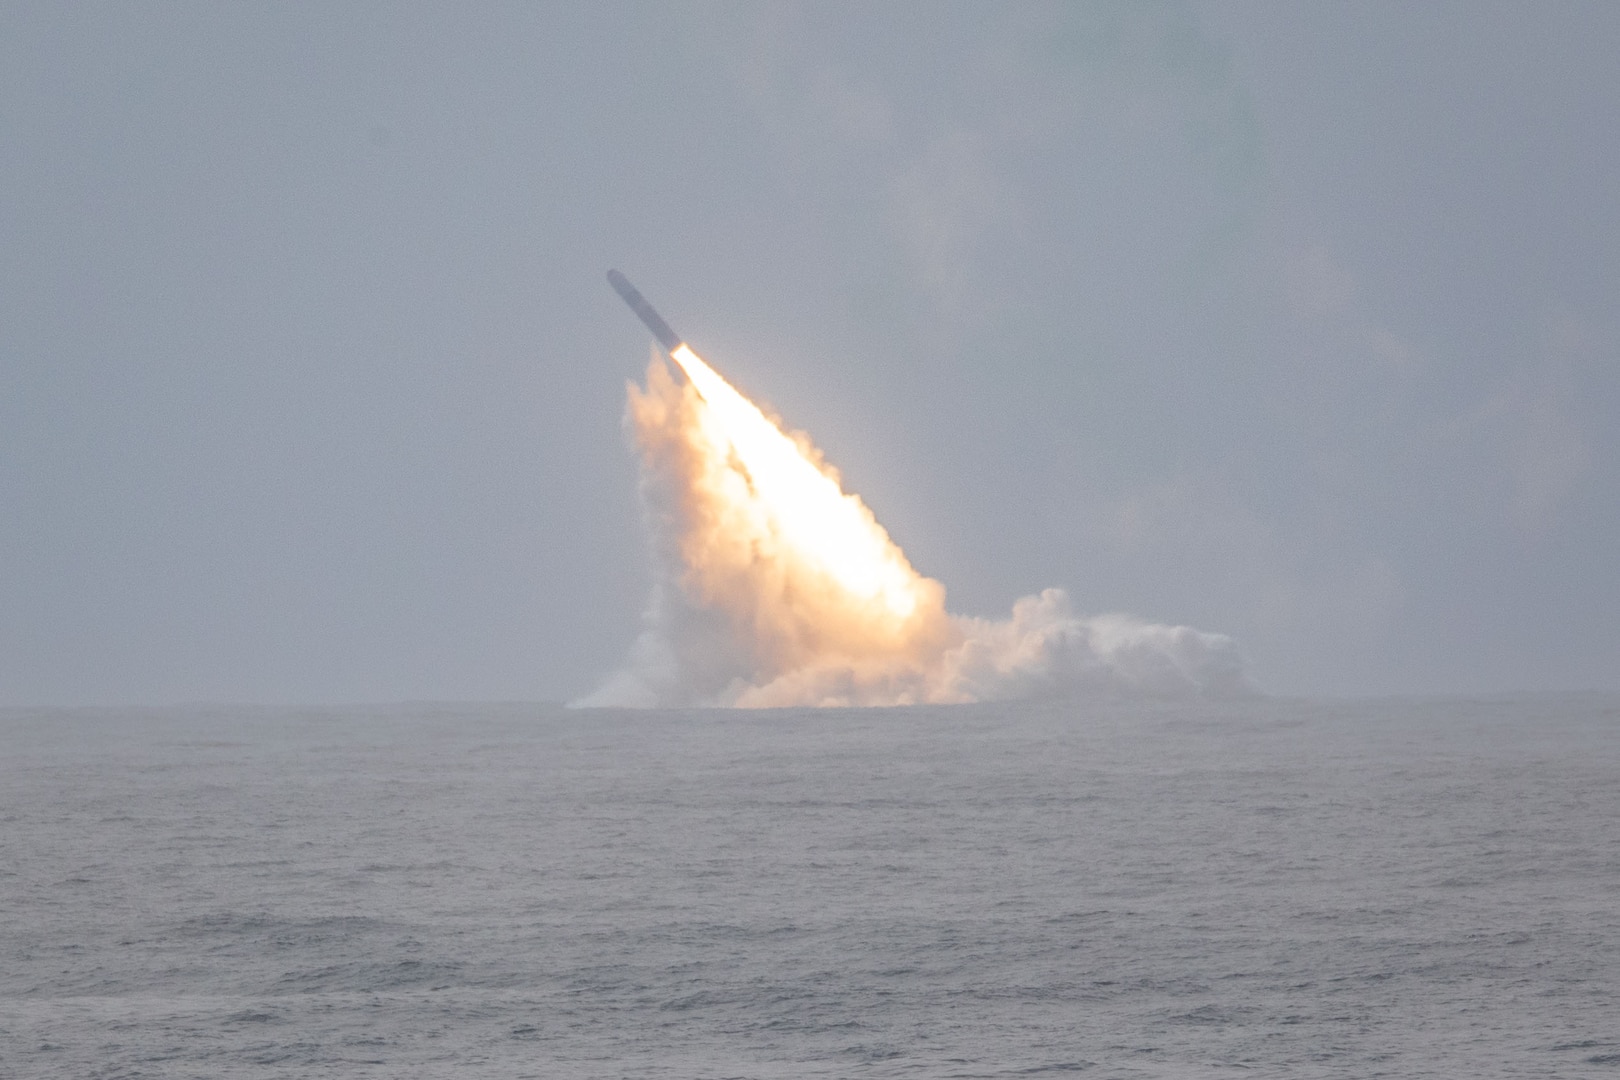 An unarmed Trident II D5LE missile launches from the Ohio-class ballistic missile submarine USS Louisiana (SSBN 743), marking a successful Demonstration and Shakedown Operation-32 (DASO-32) off the coast of Southern California, Wednesday.